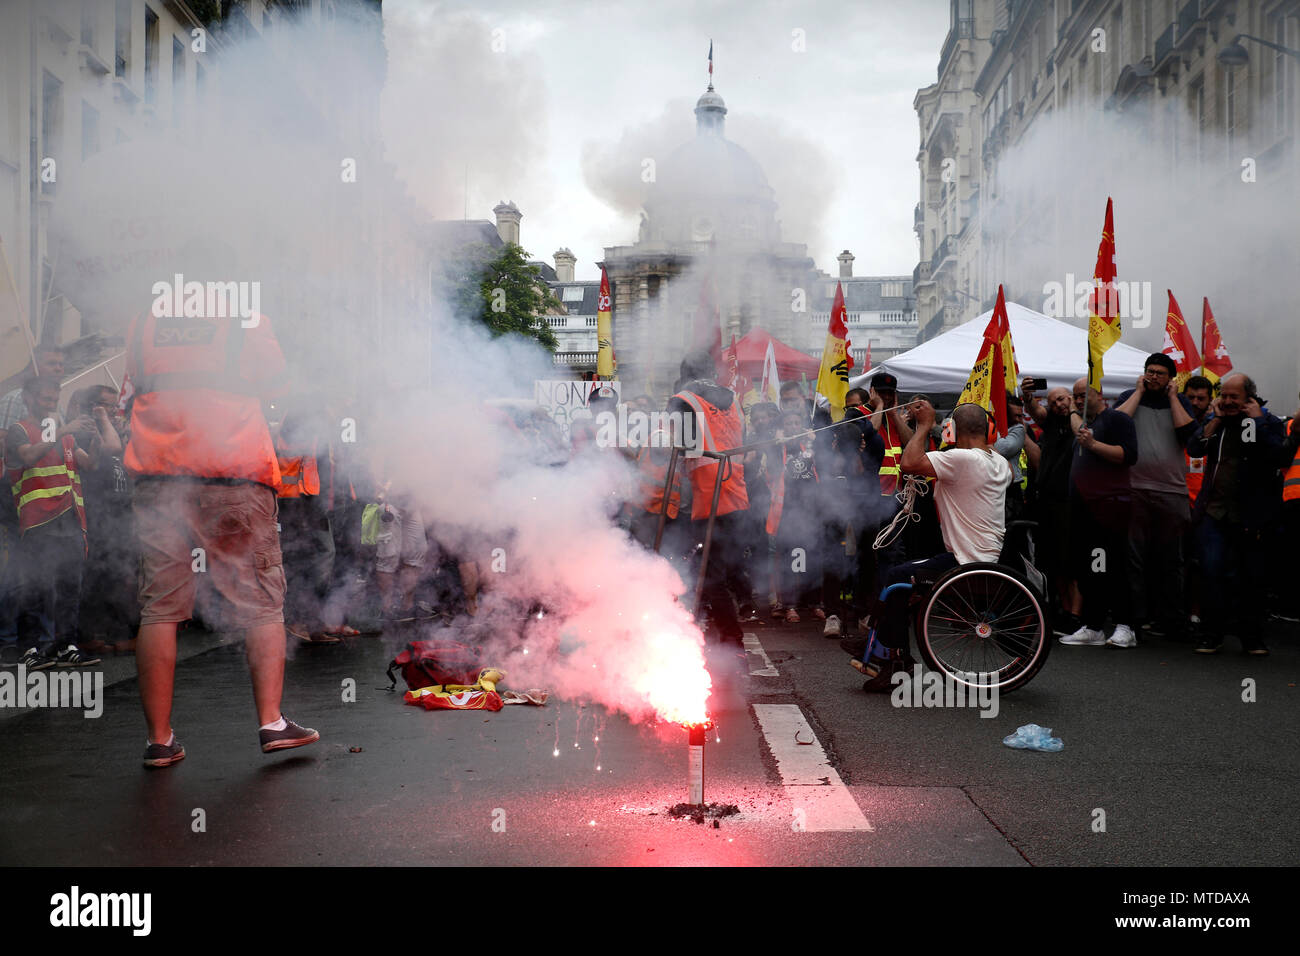 Paris, France, 29 May 2018. Hundreds of protesters have gathered to protest against the government project to change the status of the railroad workers. Alexandros Michailidis/Alamy Live News Stock Photo